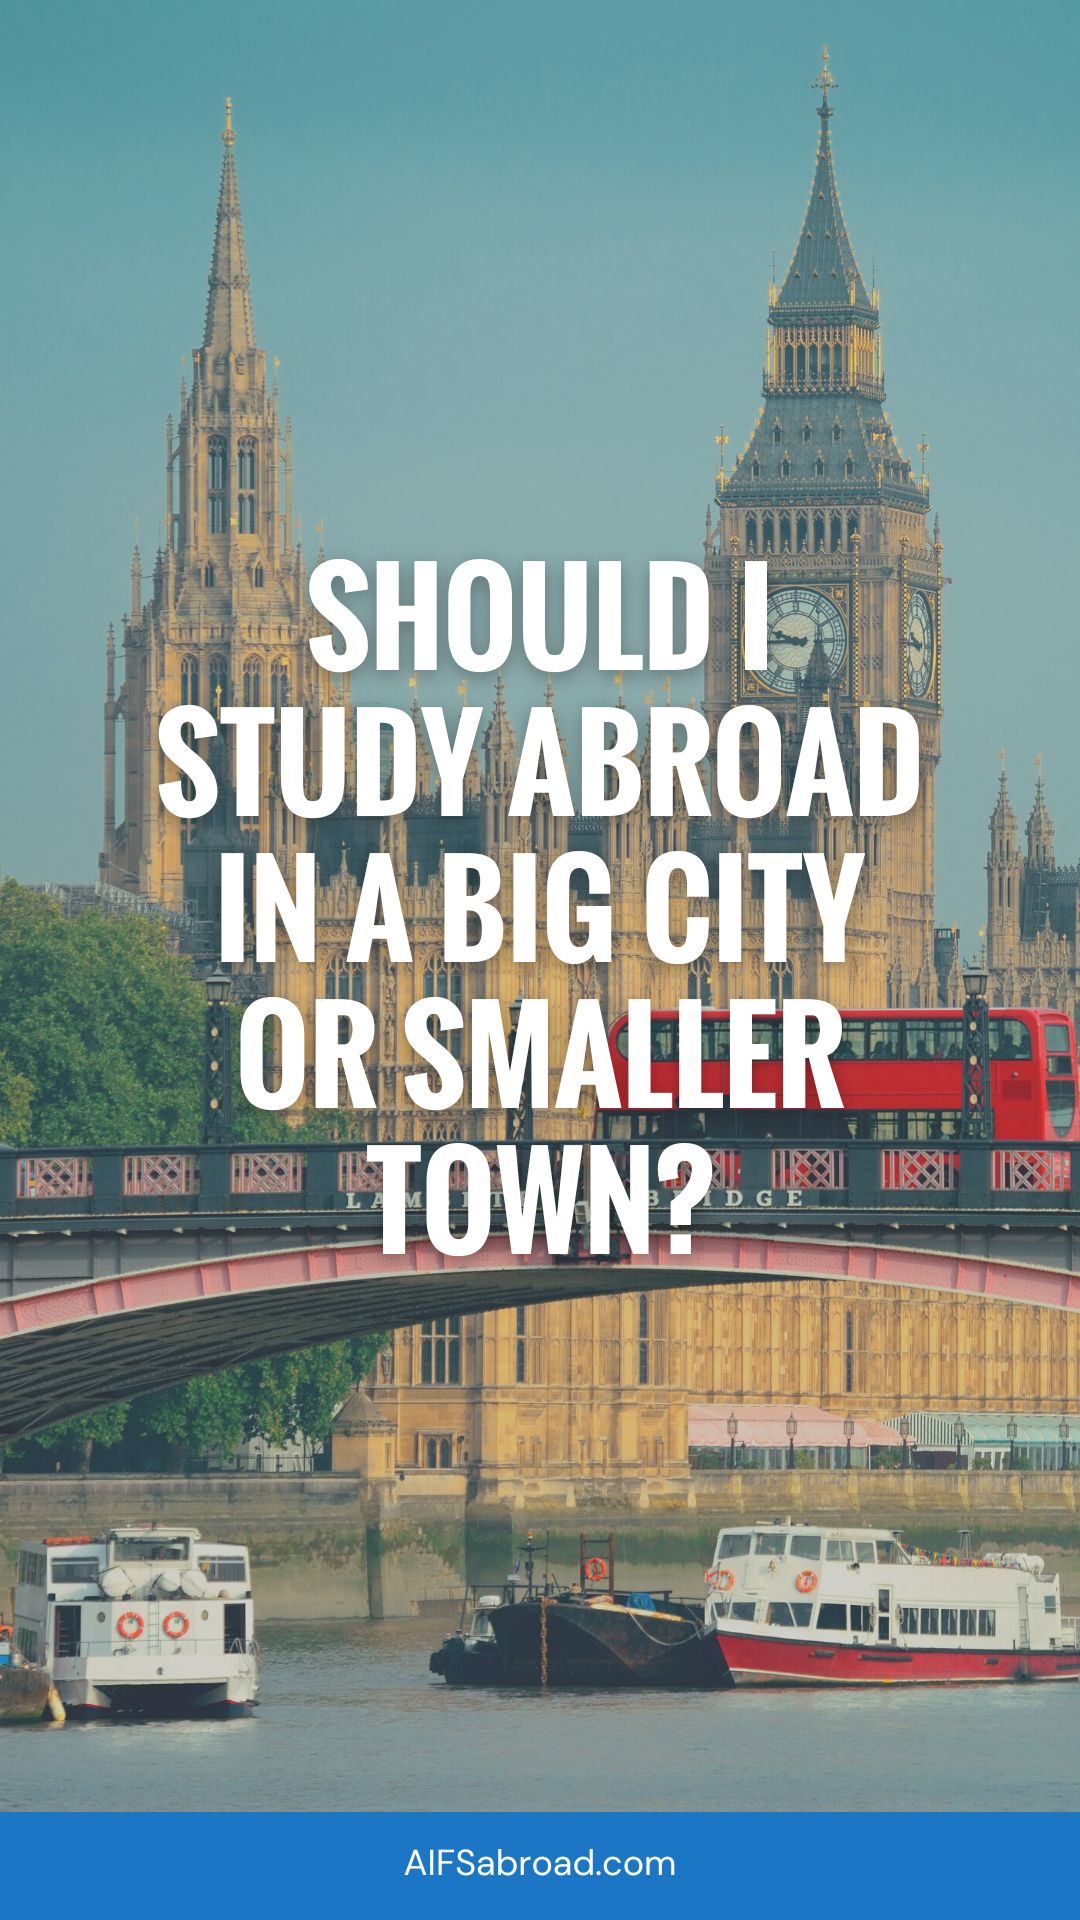 Pin image: Big Ben and Parliament in London, England with text overlay saying "Should I Study Abroad in a Big City or a Smaller Town?"